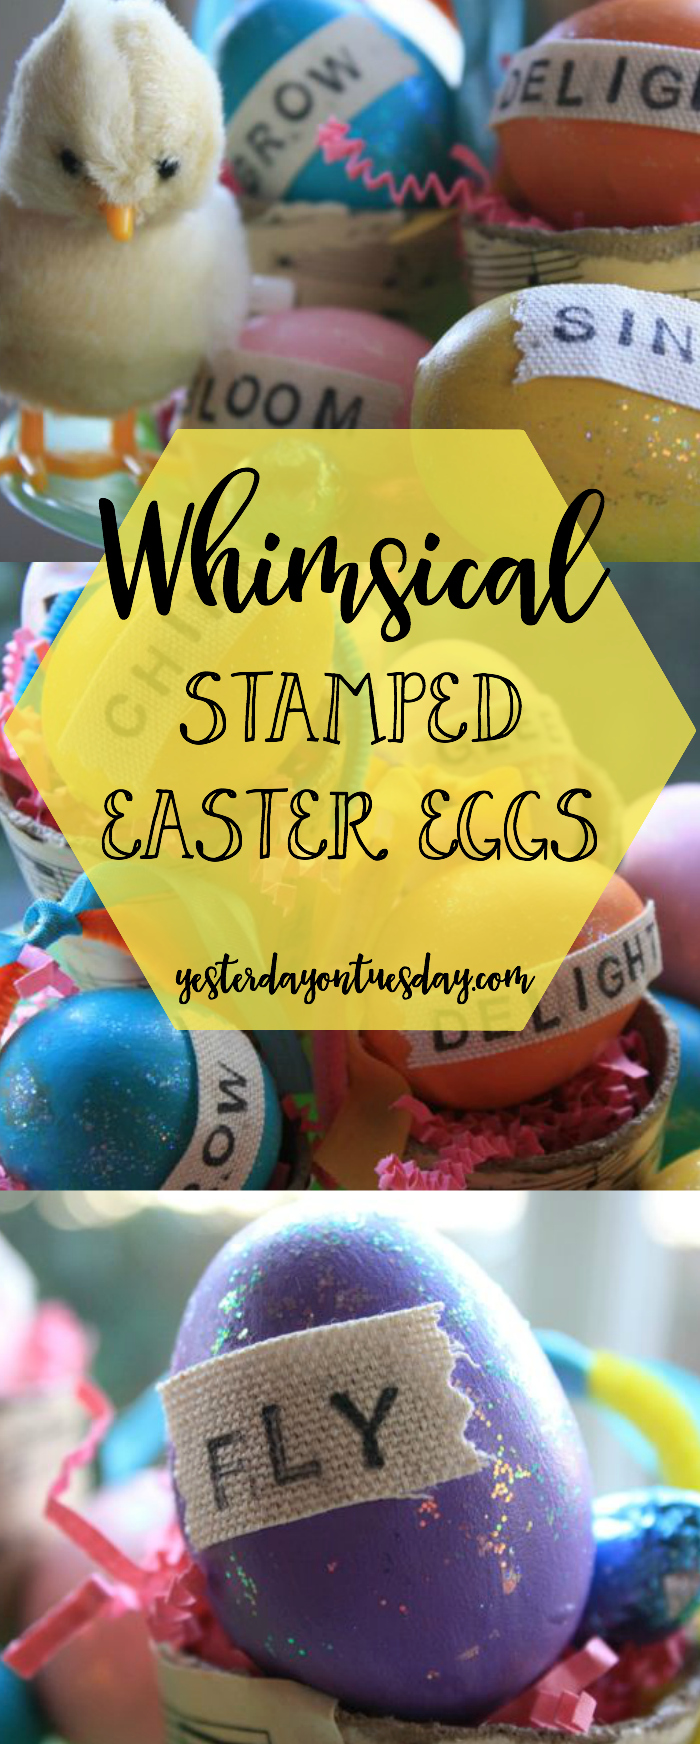 Whimsical Stamped Easter Eggs: How to create colorful and fun faux eggs for Easter decor.